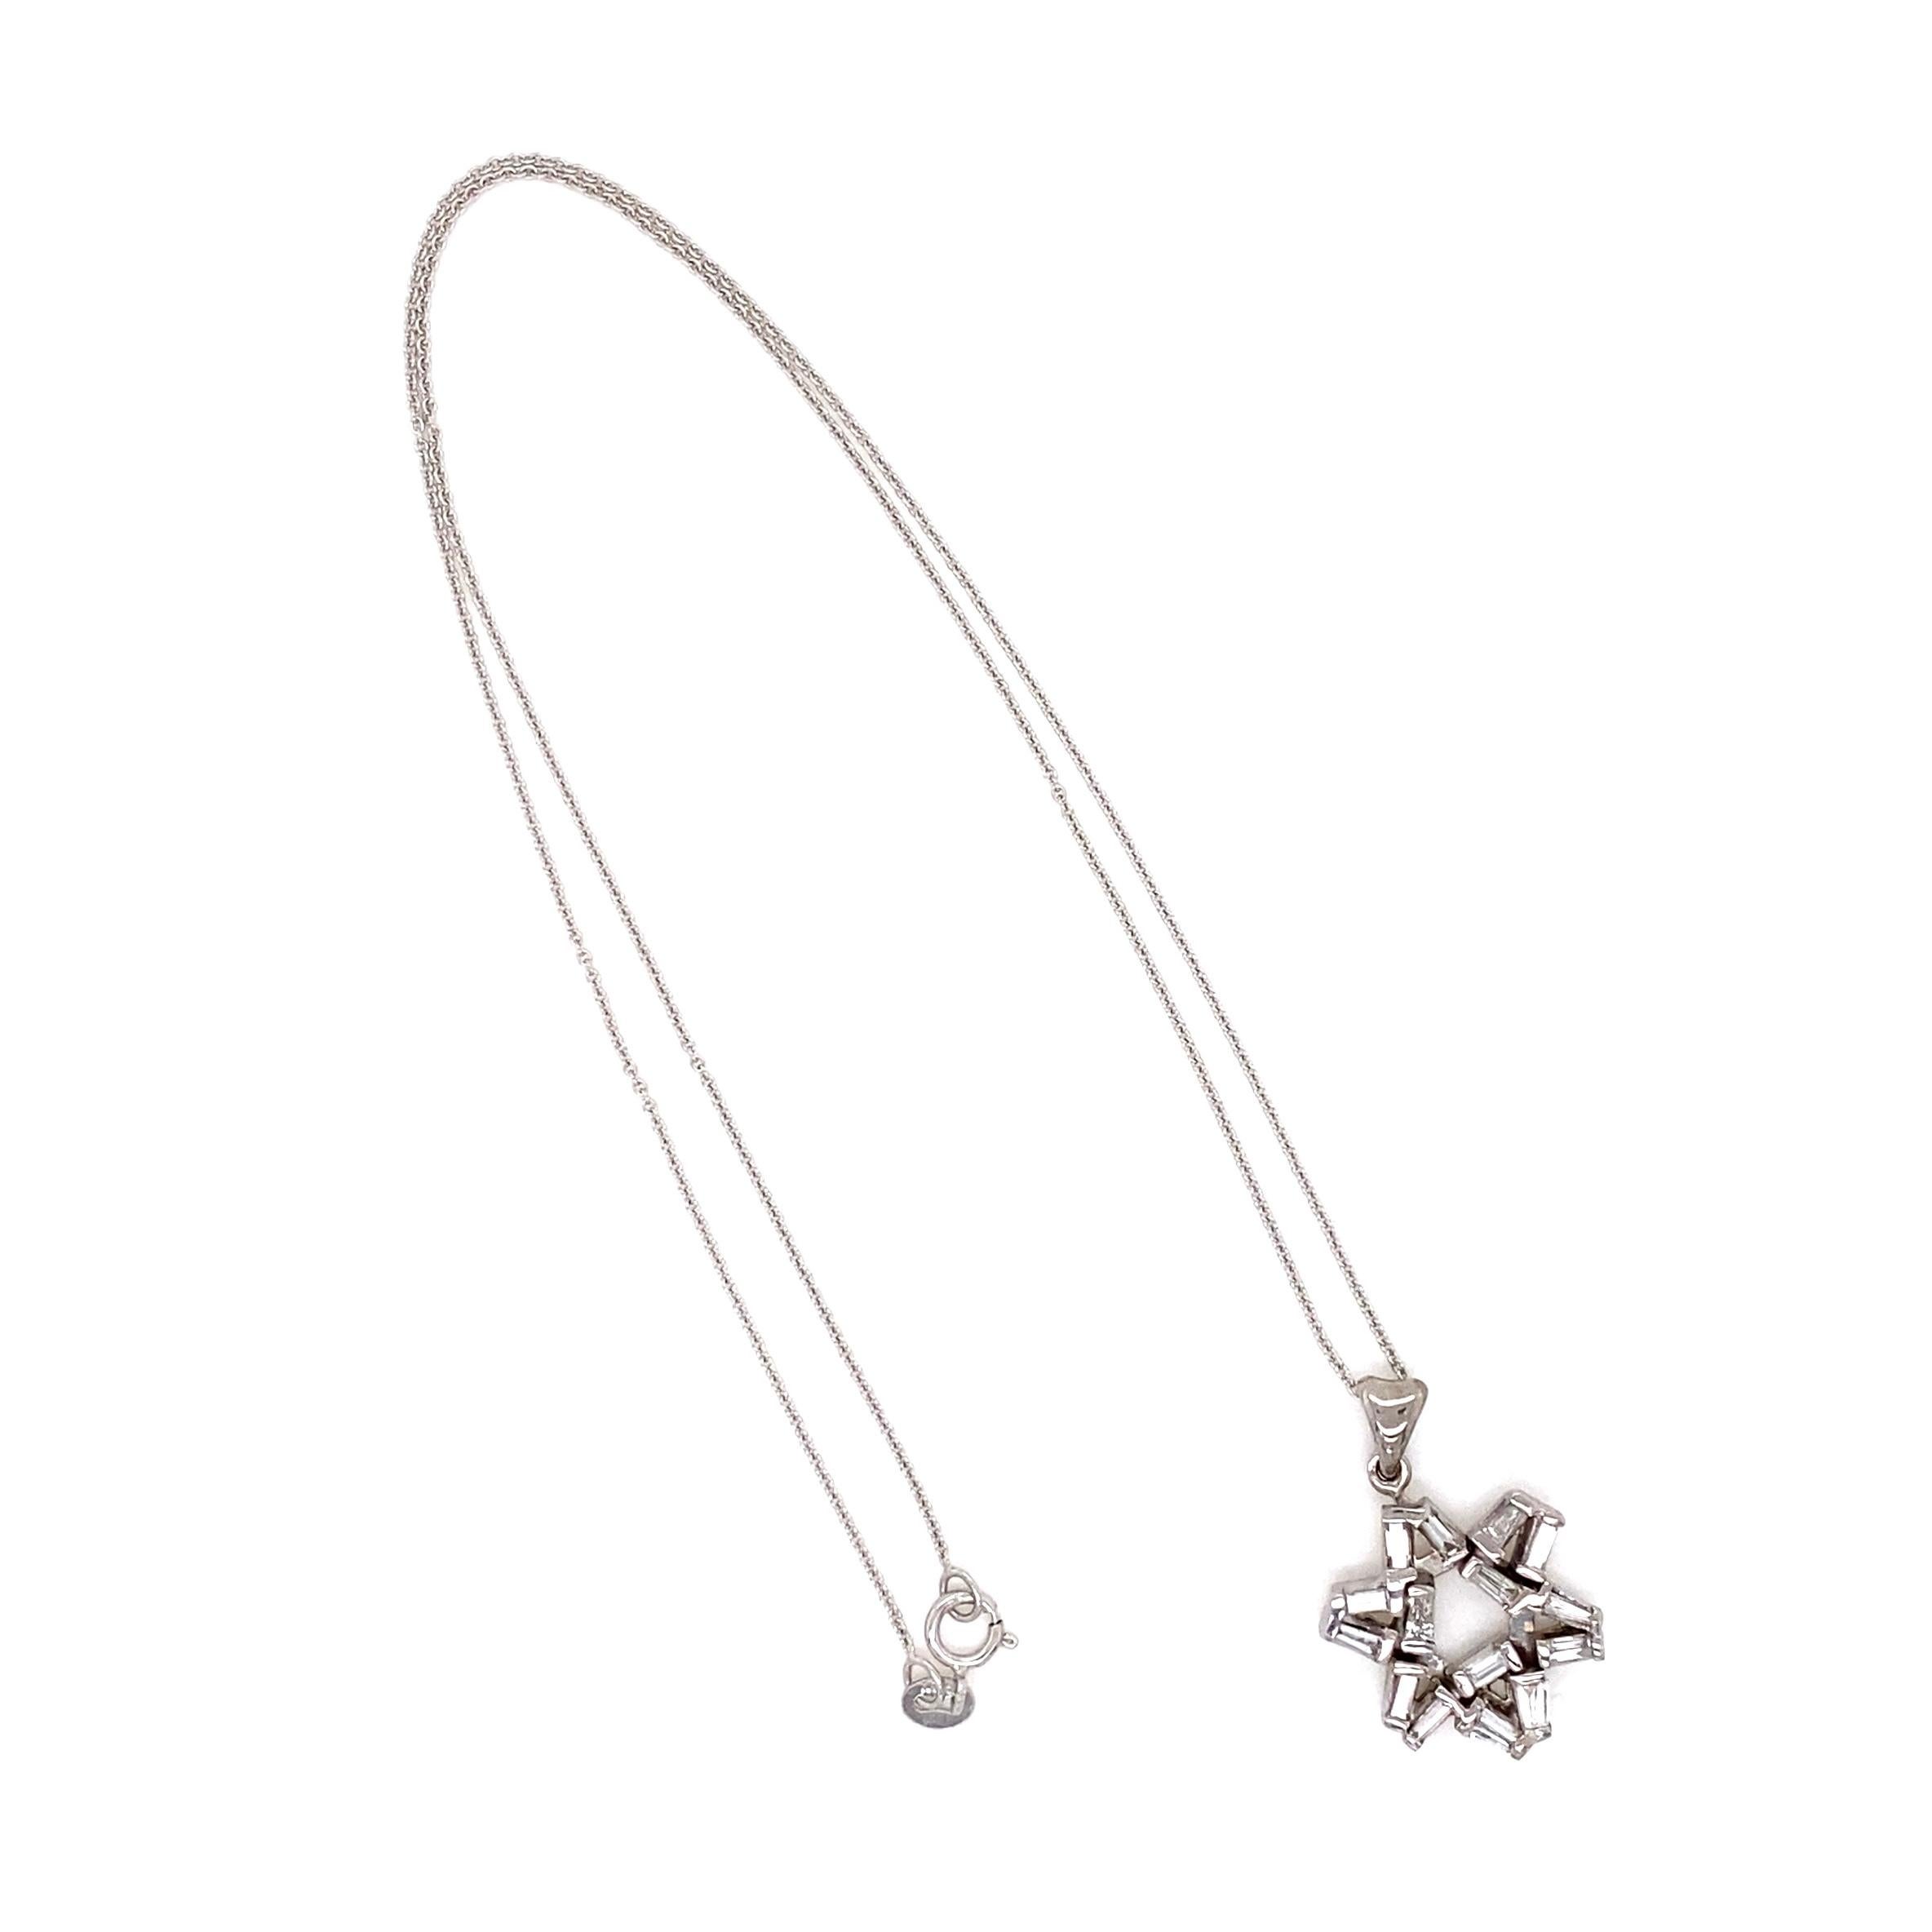 Simply Beautiful and Finely Detailed Diamond Six-pointed Star of David Pendant, Hand set with 15 Baguette Diamonds, weighing approx. 0.70tcw. Hand crafted in 14K White Gold. The Cross, measures approx. 0.95” tall x 0.66” wide x 0.11” deep; suspended